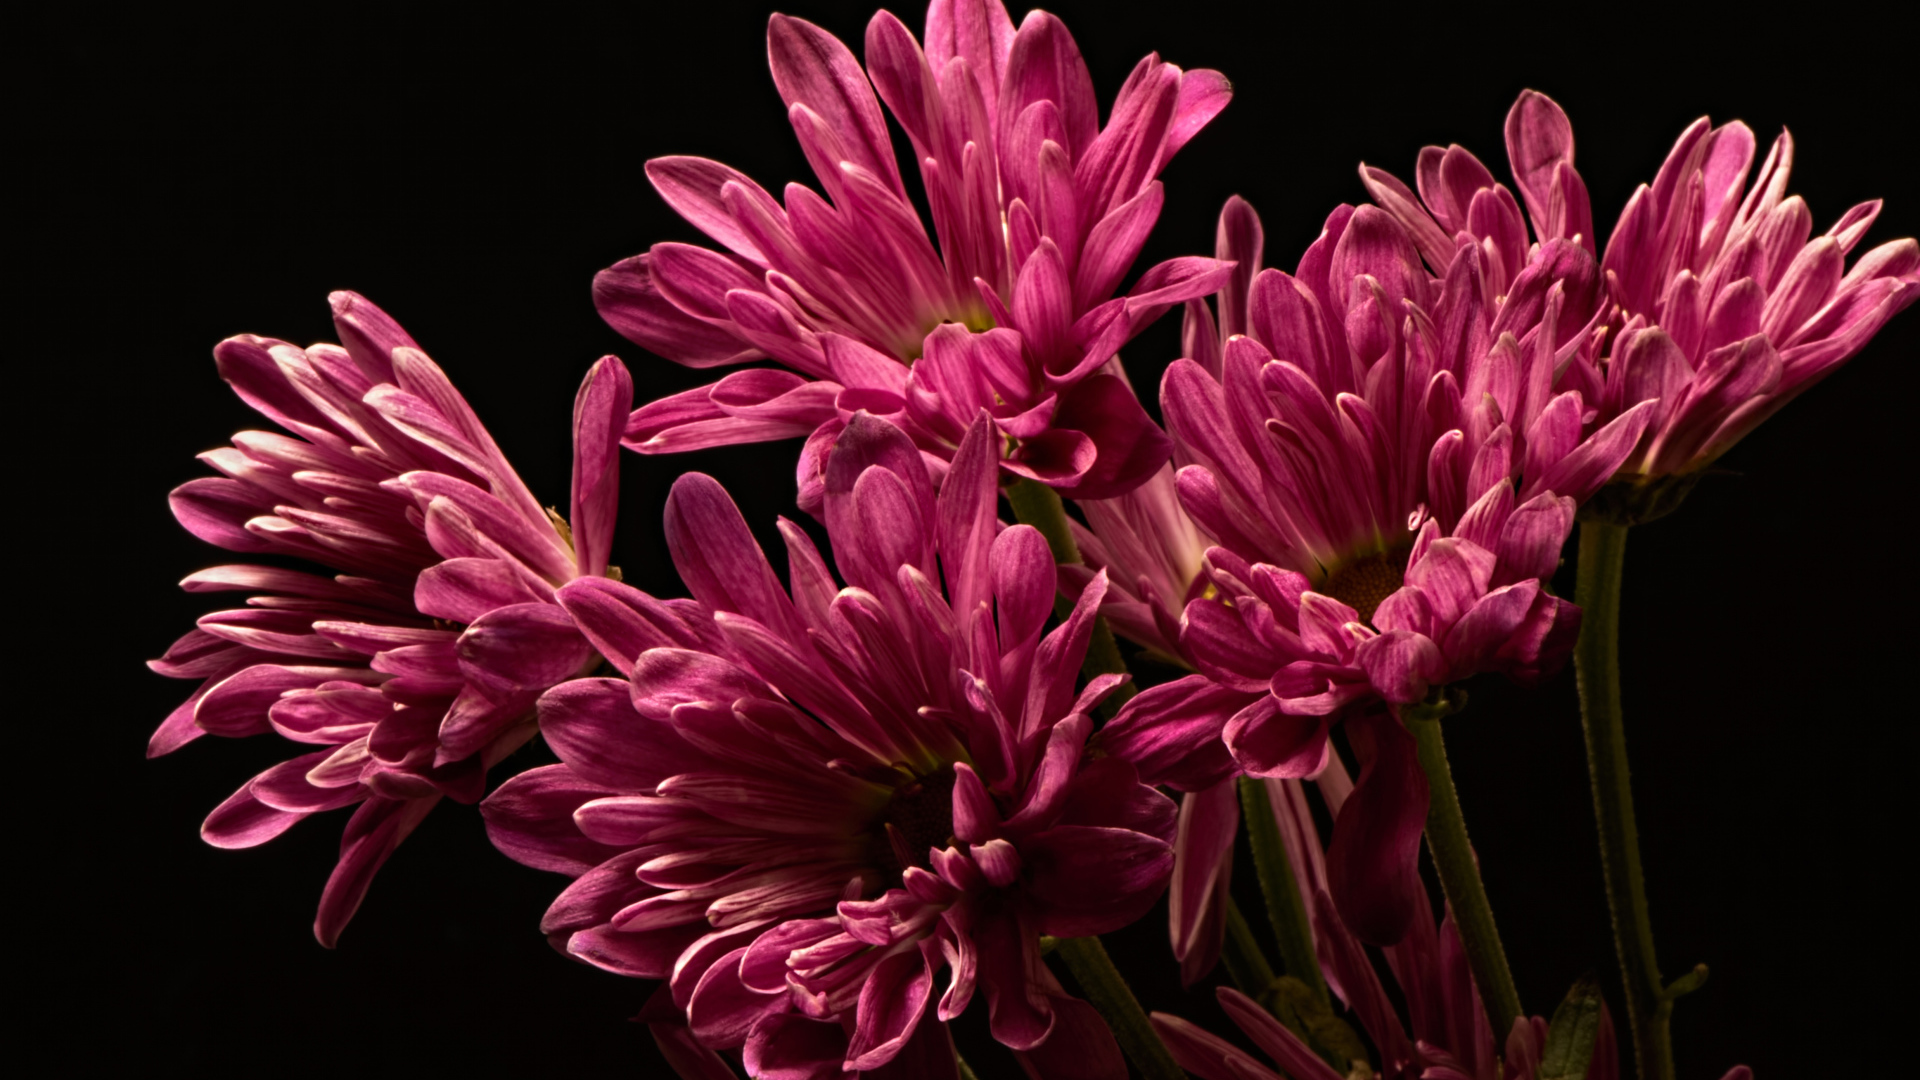 Bouquet of pink chrysanthemums on a black background close-up